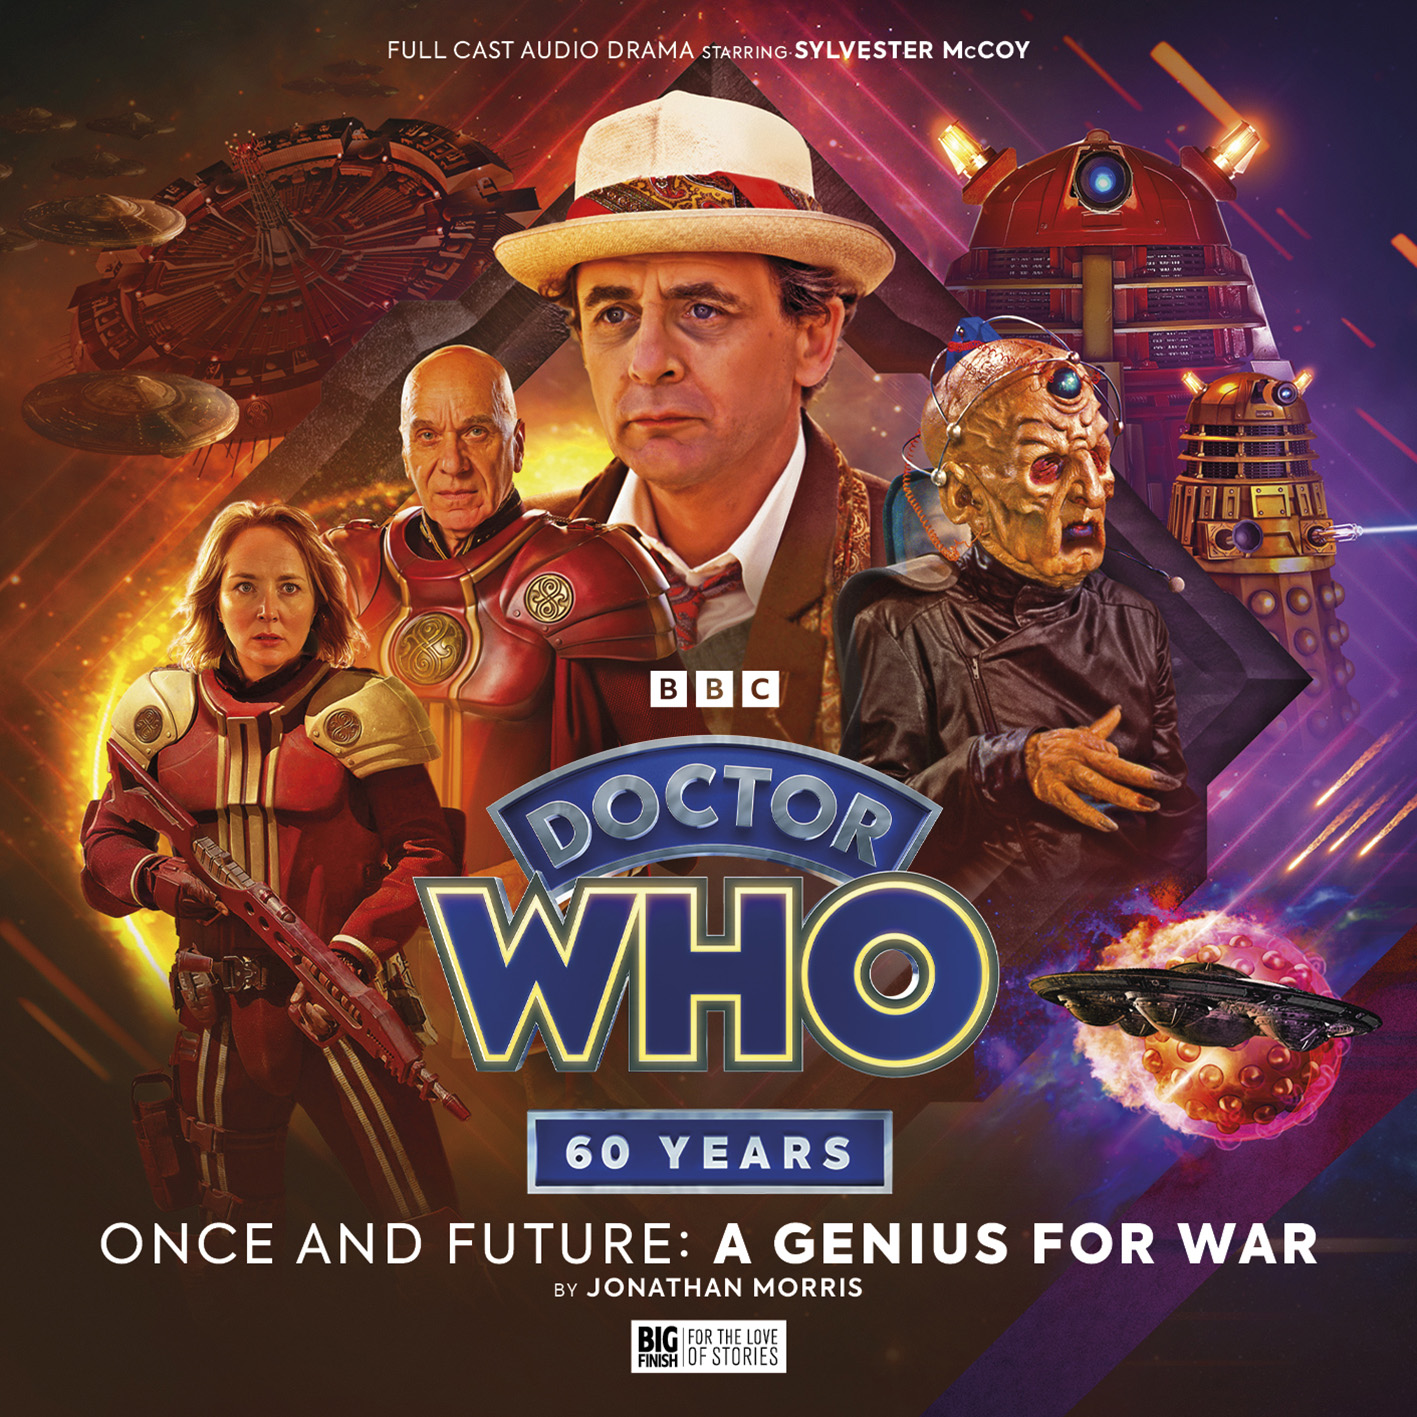 Cover artwork for Doctor Who - Once and Future: A Genius For War by Lee Johnson. From left to right on the cover are Commander Veklin, the Time Lord General, the Seventh Doctor and Davros. In the background are several Dalek ships, a red and a gold Dalek.